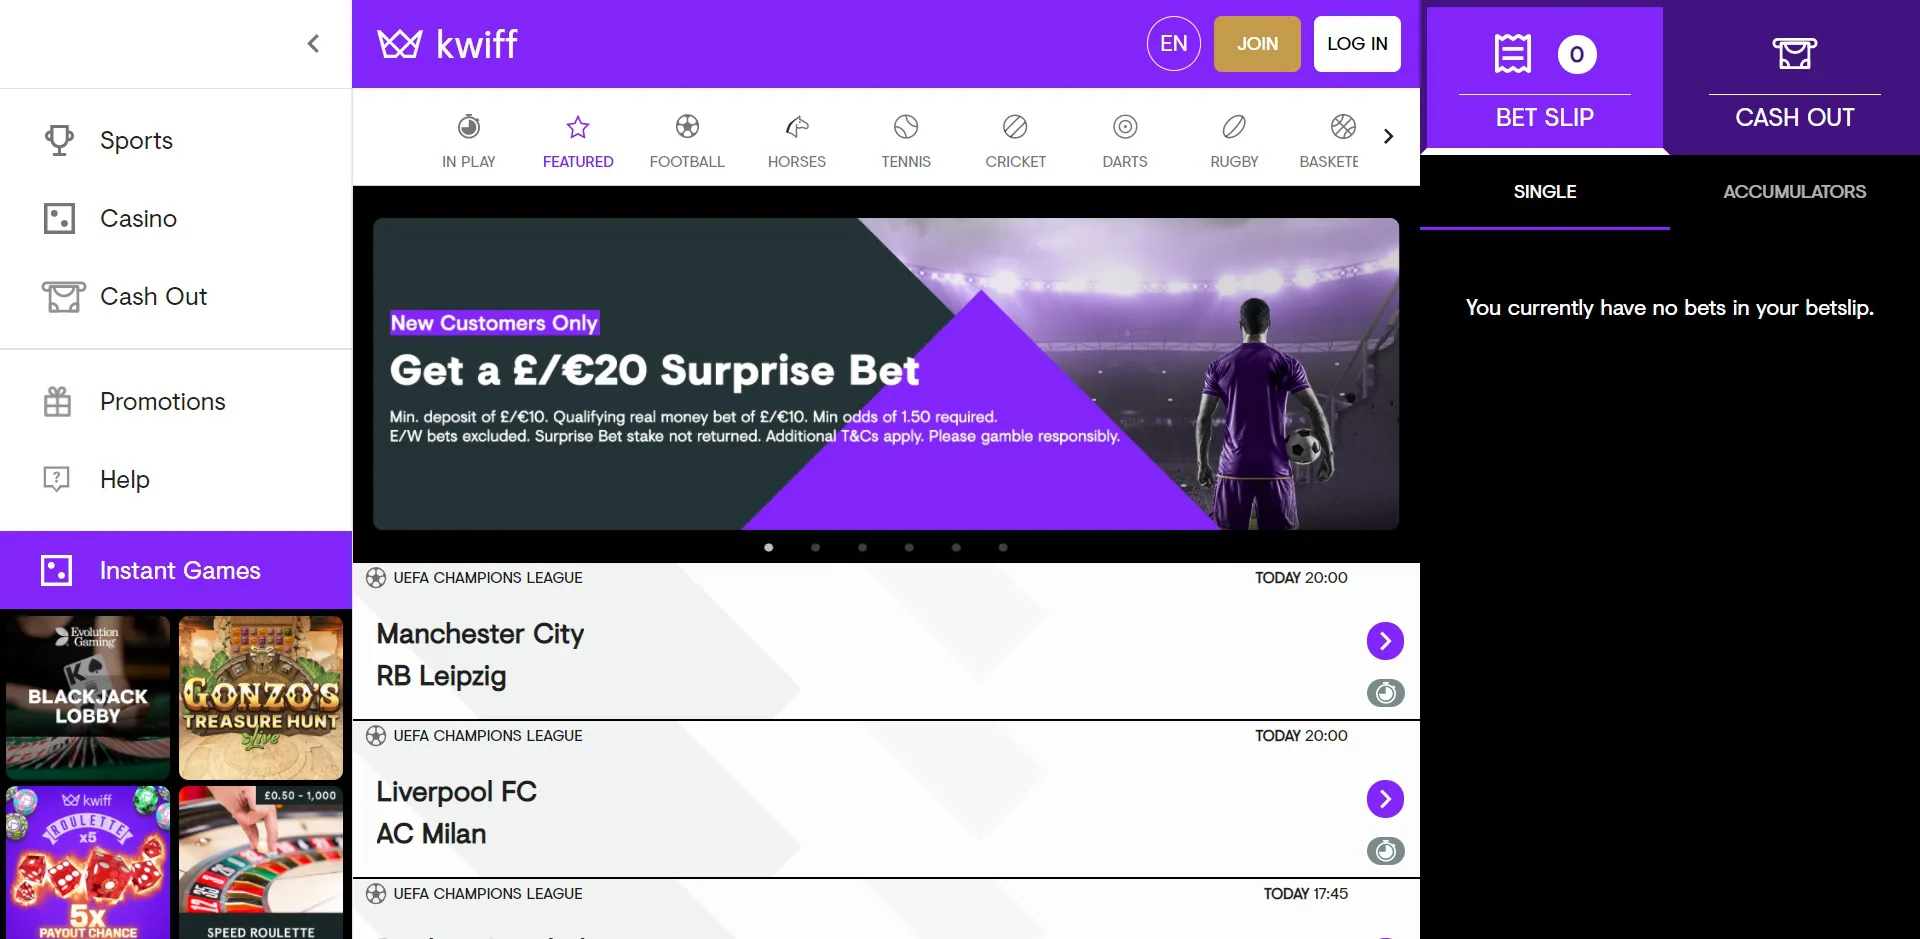 Kwiff - Top User-Friendly PayPal Betting Site in UK